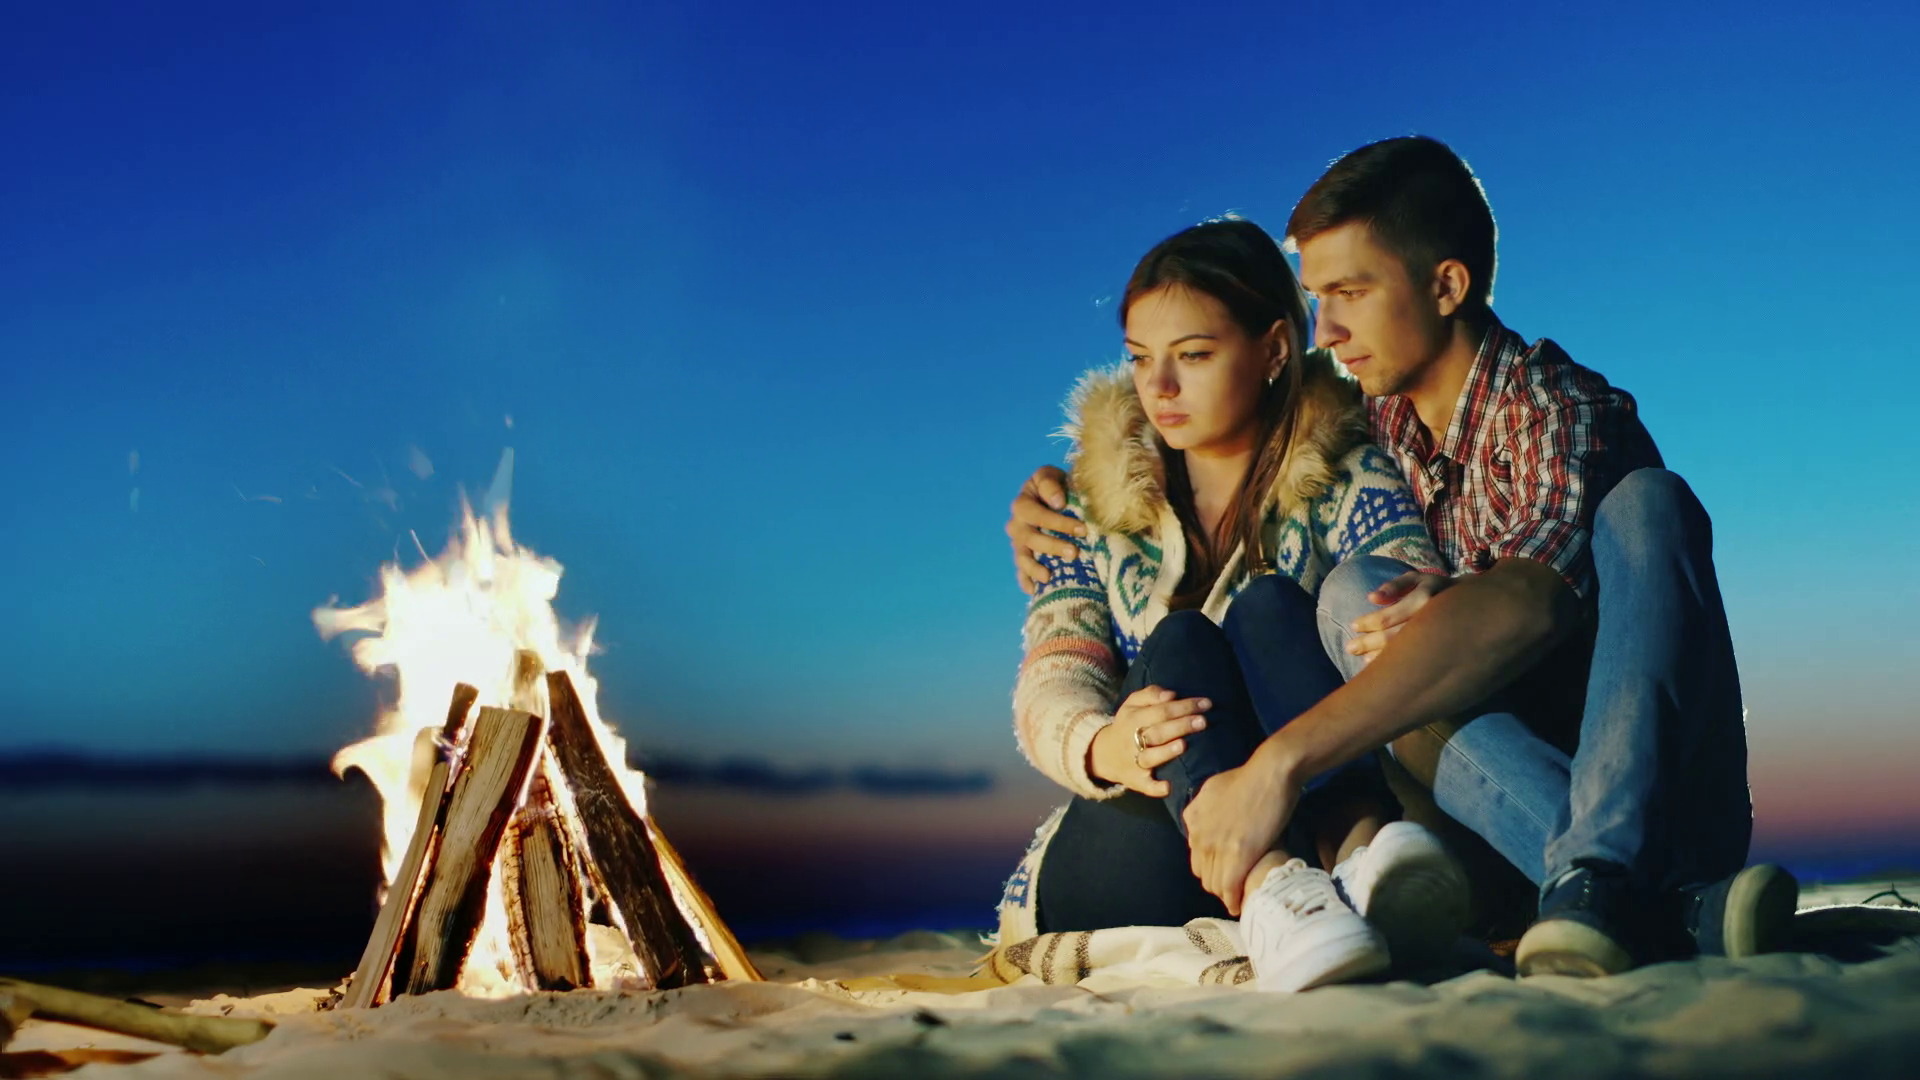 Romantic young couple sitting on the beach campfire. Hug, admiring ...